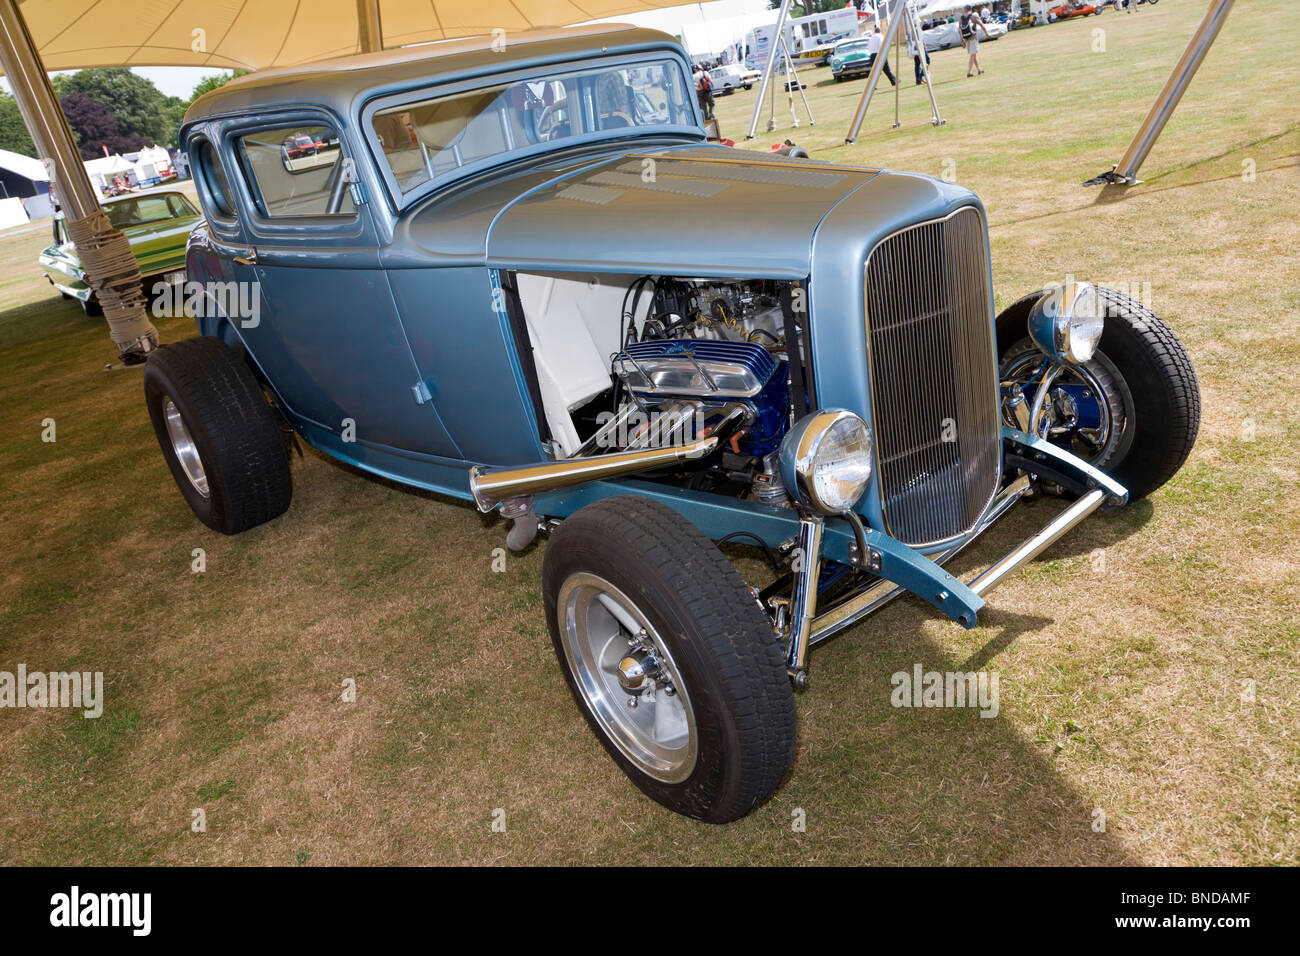 Jeff Beck's 1932 Ford 'Little Deuce' Coupe Hot Rod all'auto, Stars & Chitarre display, 2010 Goodwood Festival of Speed, UK. Foto Stock